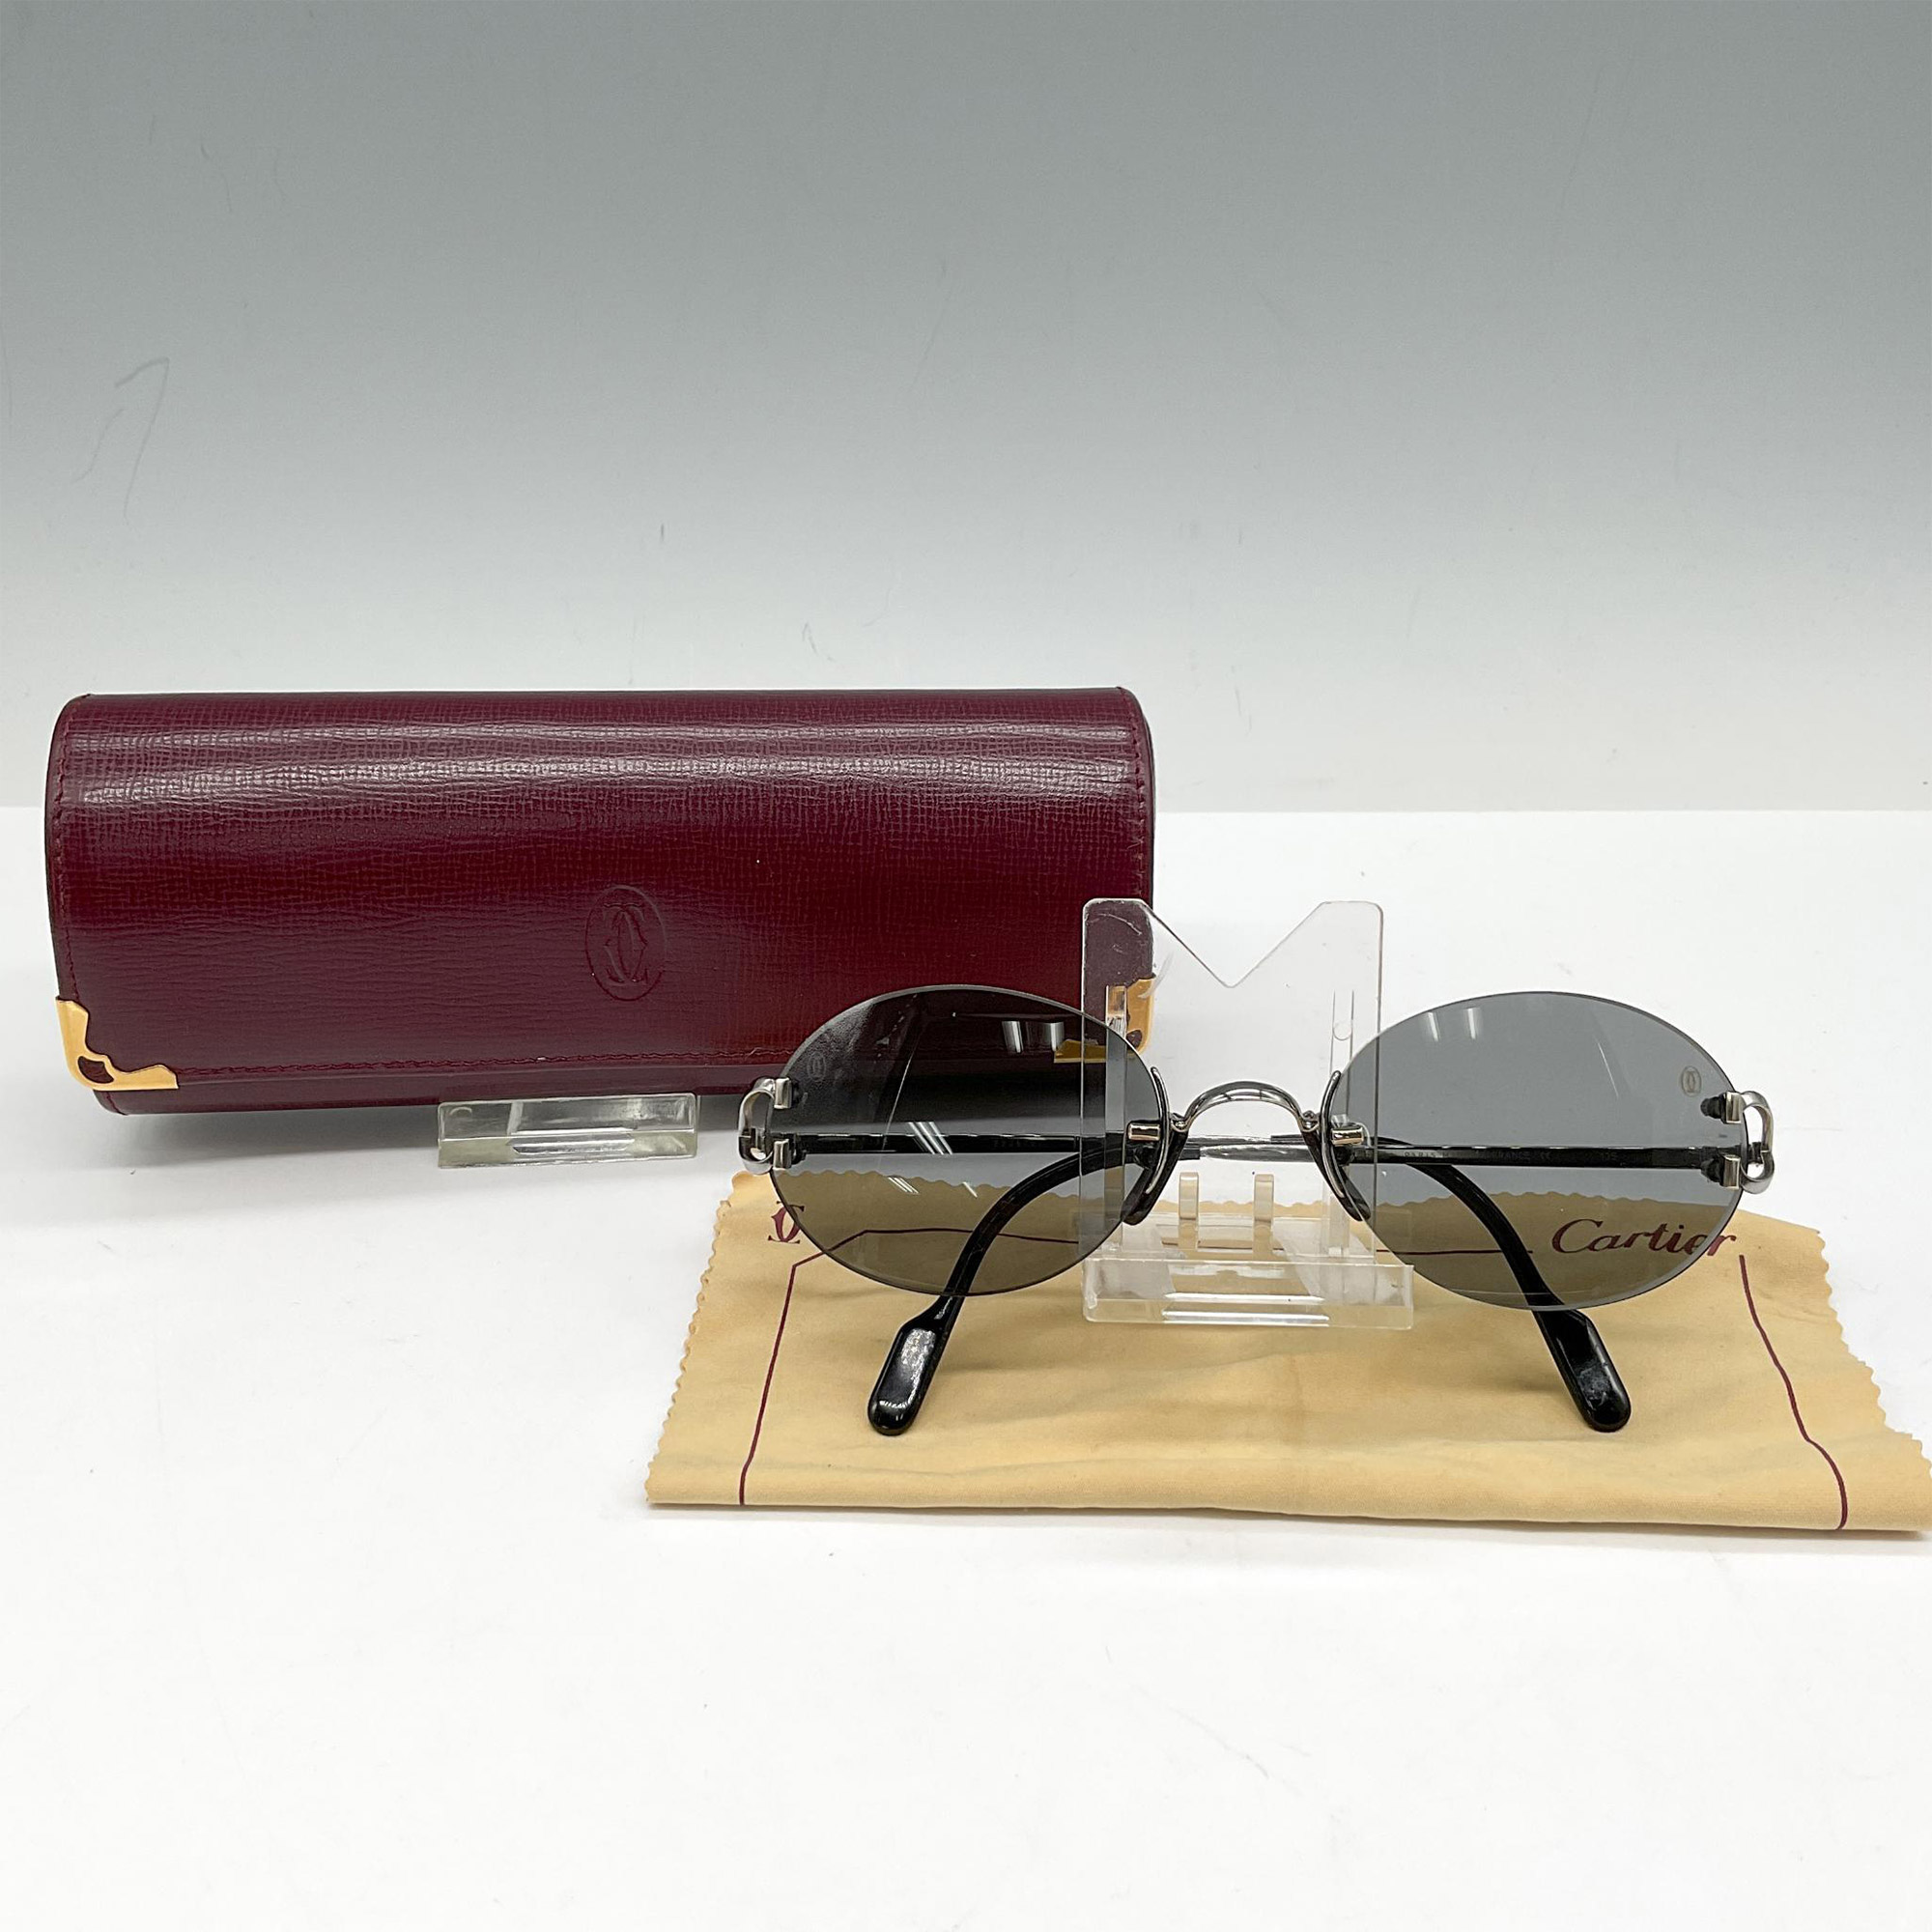 Cartier Scala Rimless Sunglasses with Case - Image 2 of 5